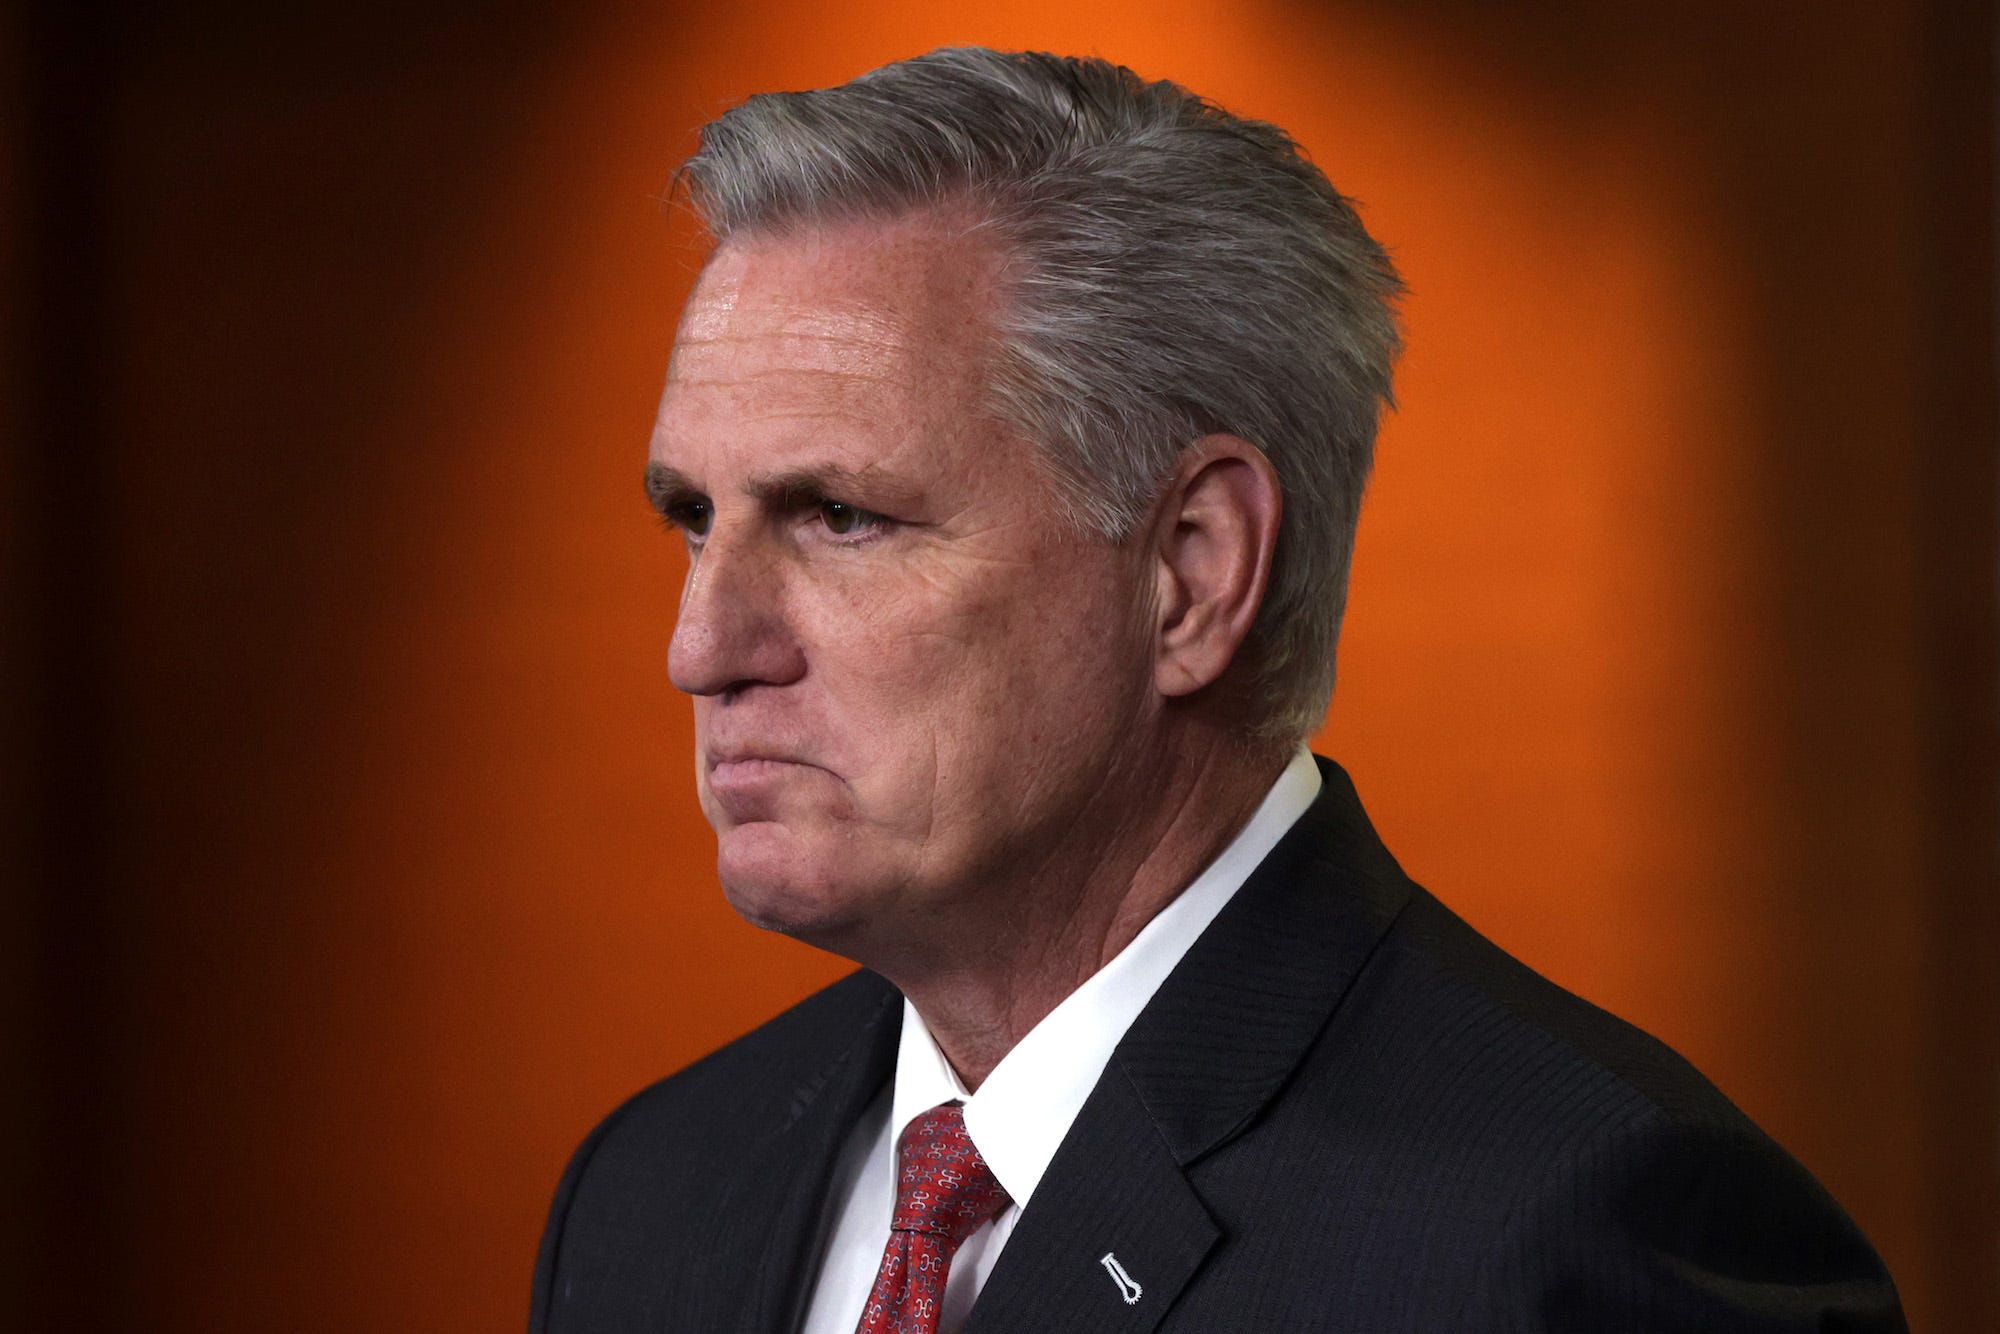 House Minority Kevin McCarthy, his lips turned down, stands against an orange background while wearing a dark suit, white shirt, and patterned tie.